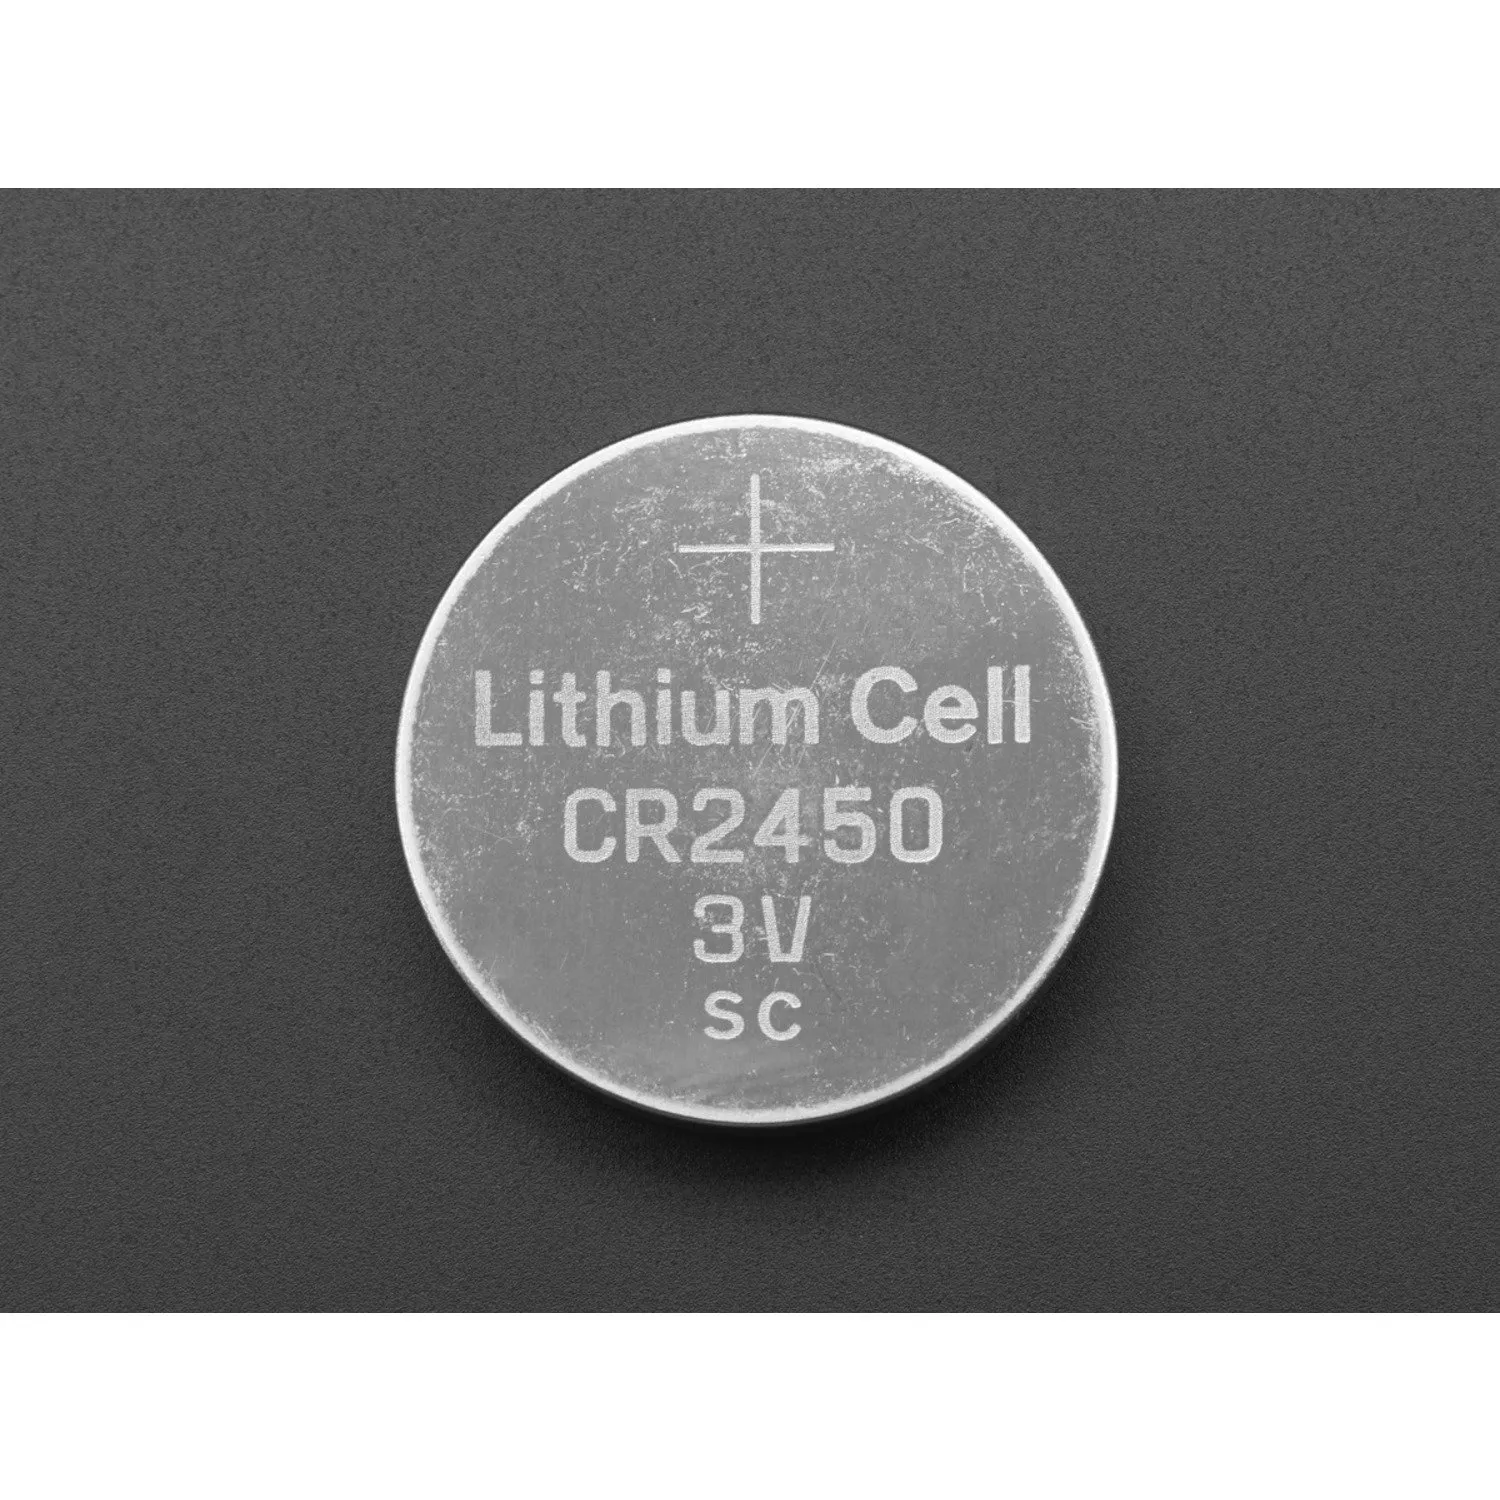 Photo of CR2450 Lithium Coin Cell Battery